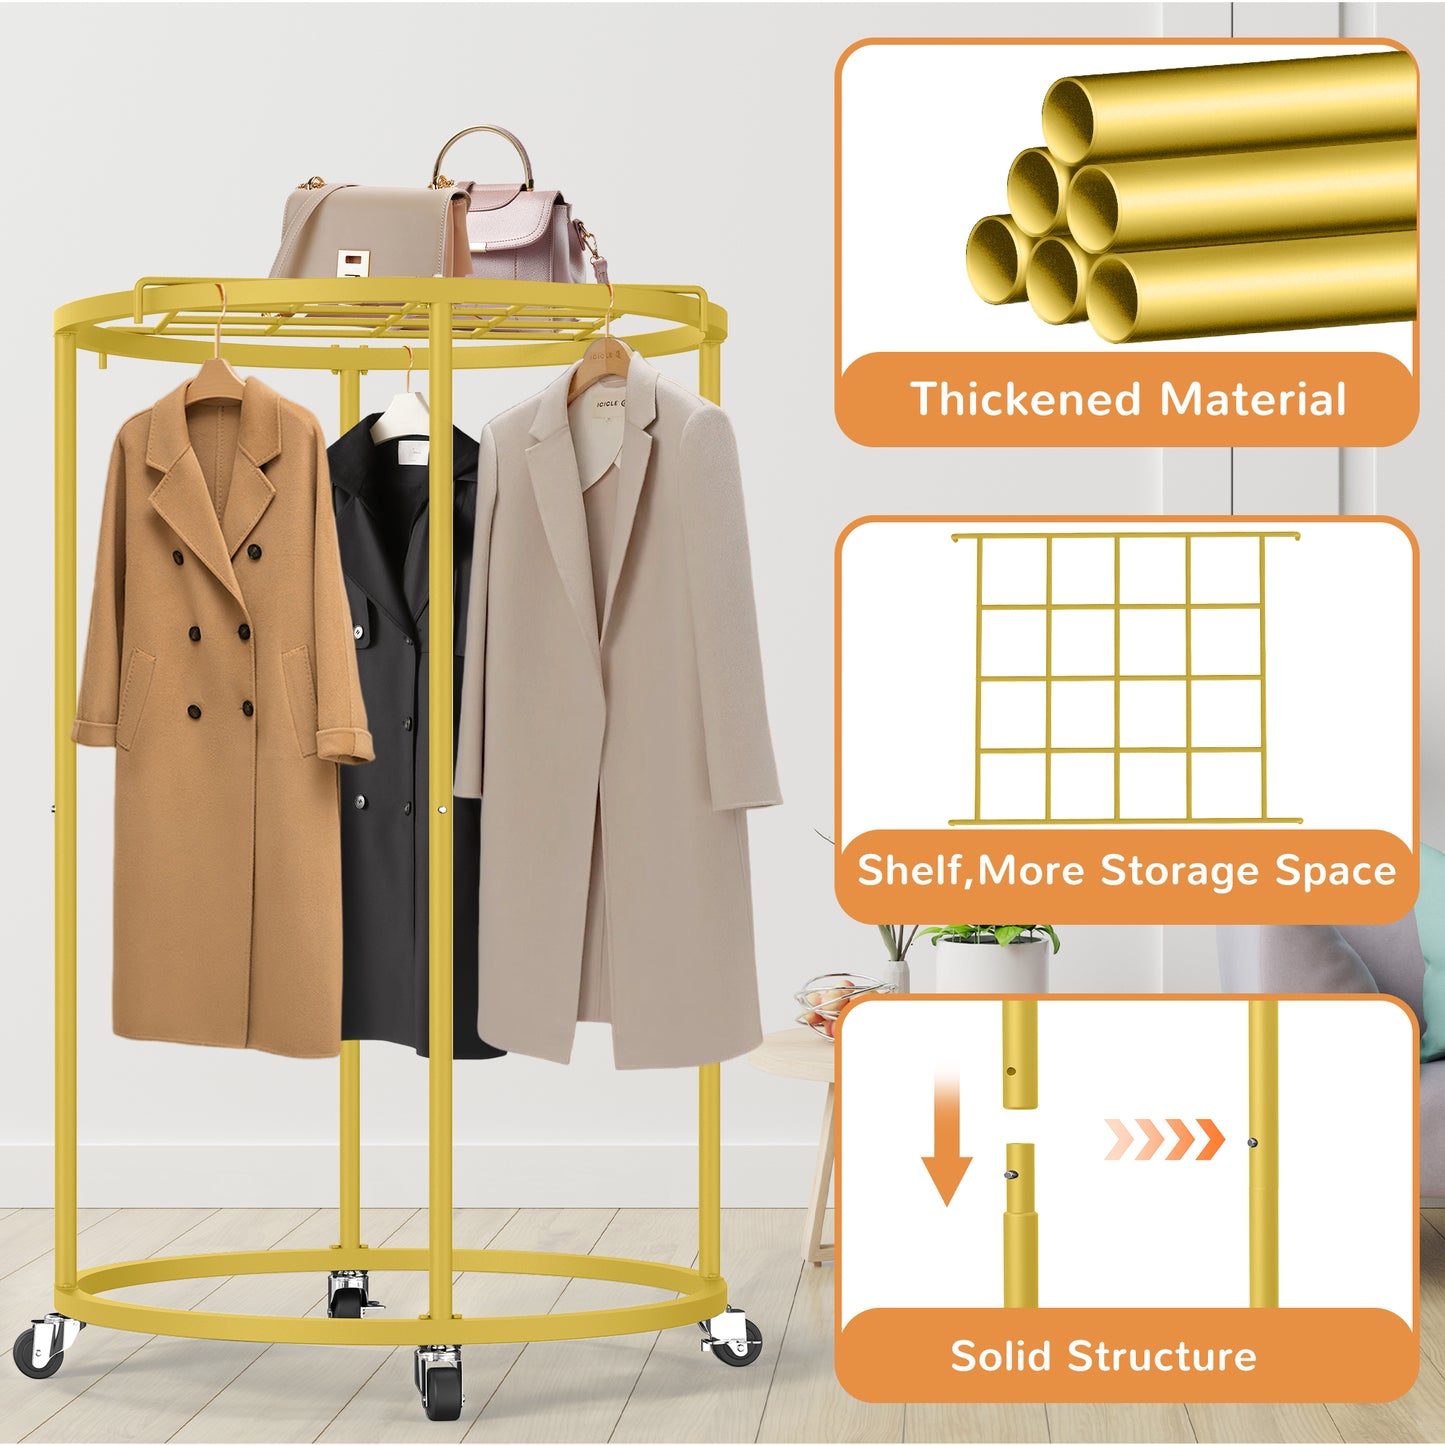 Nefoso Clothing Garment Rack,Round Clothes Rack with 4 Universal Wheels and Shelf Standard Rolling Clothes Organizer